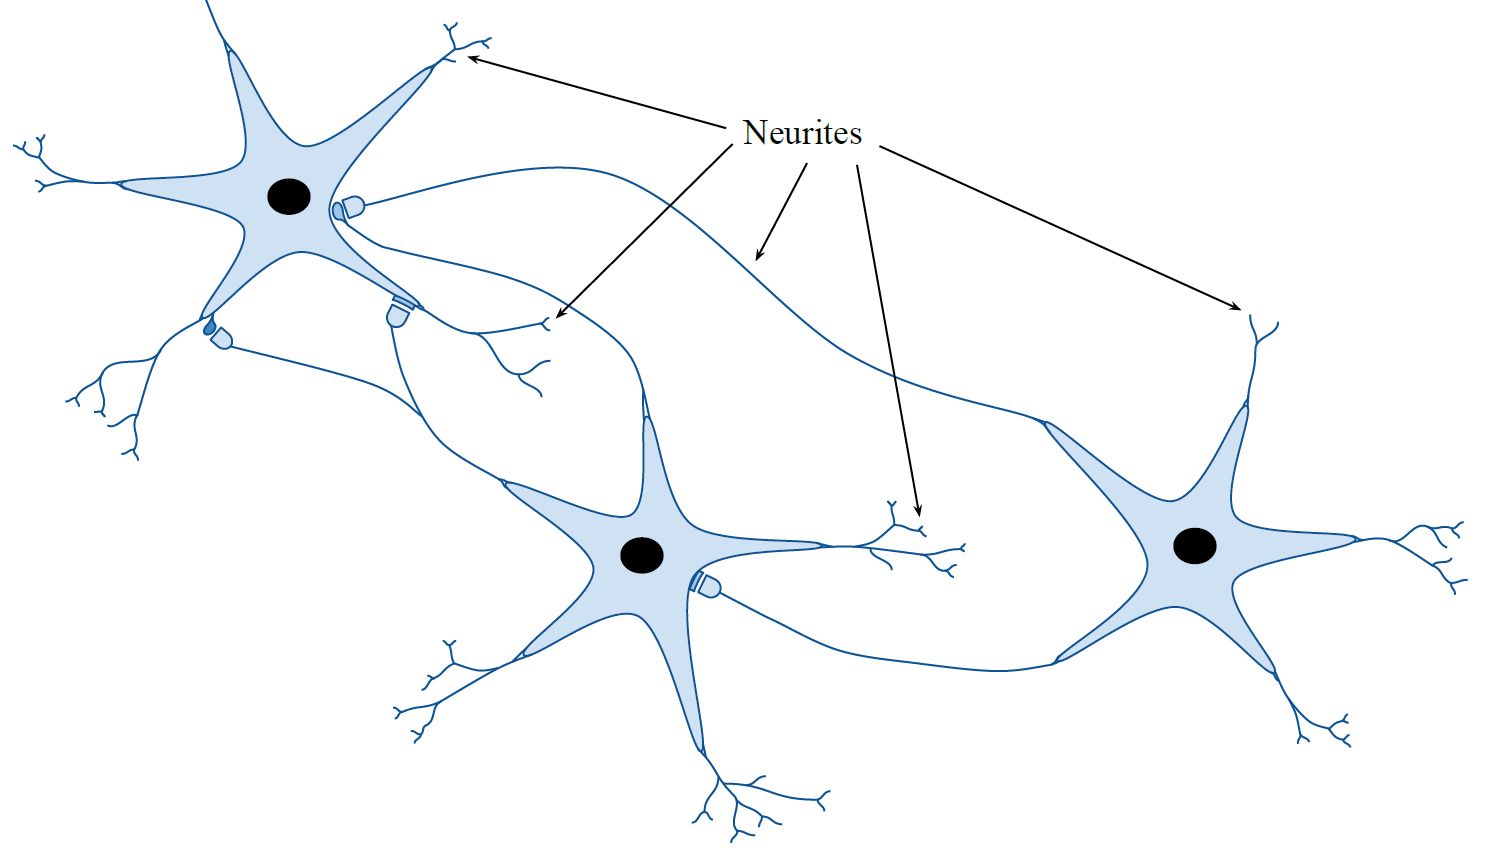 A drawn diagram of scientific research featuring blue star-like figures connected by lines